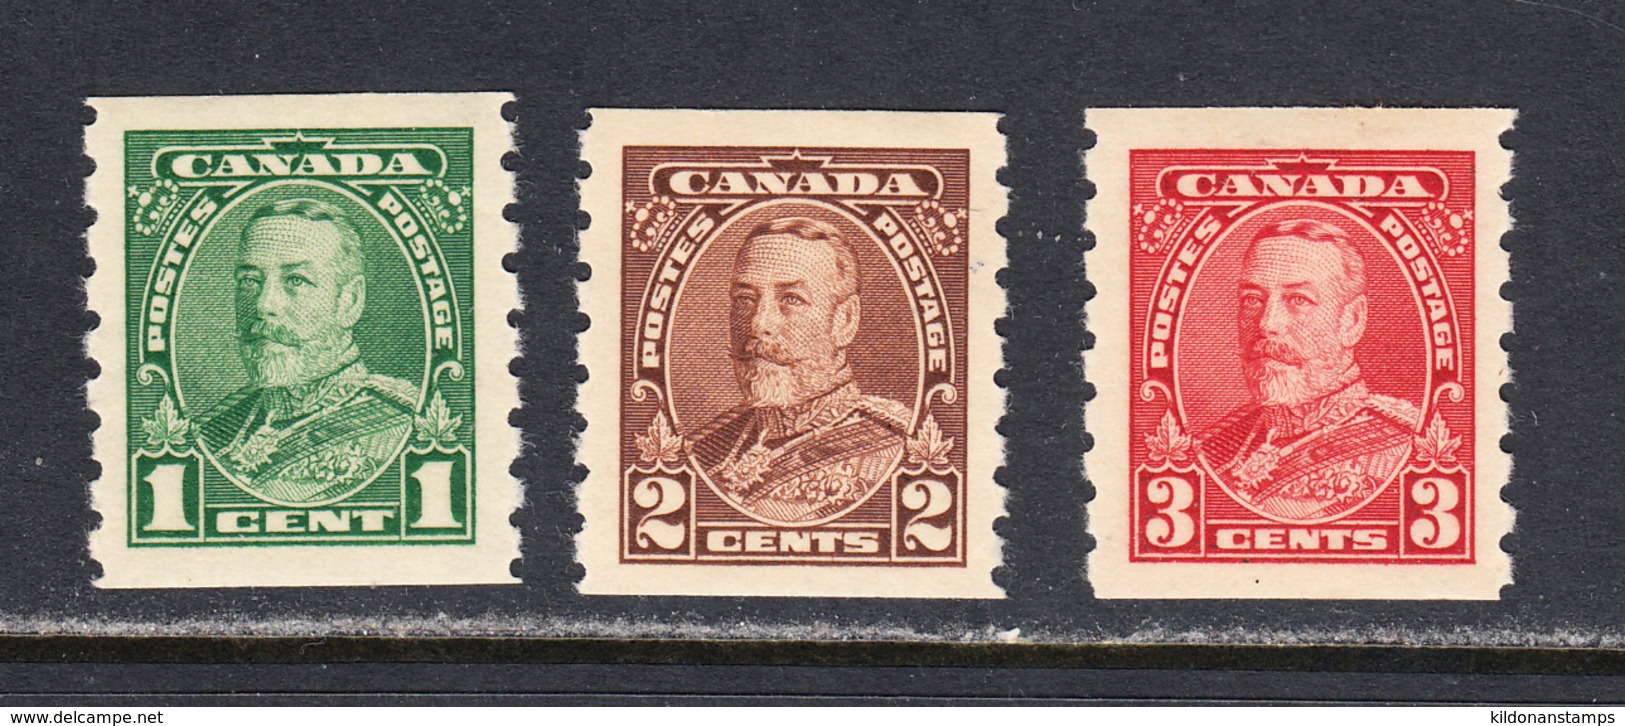 Canada 1935 Coils, Mint Mounted, See Notes, Sc# 228-230, SG 352-354 - Francobolli In Bobina